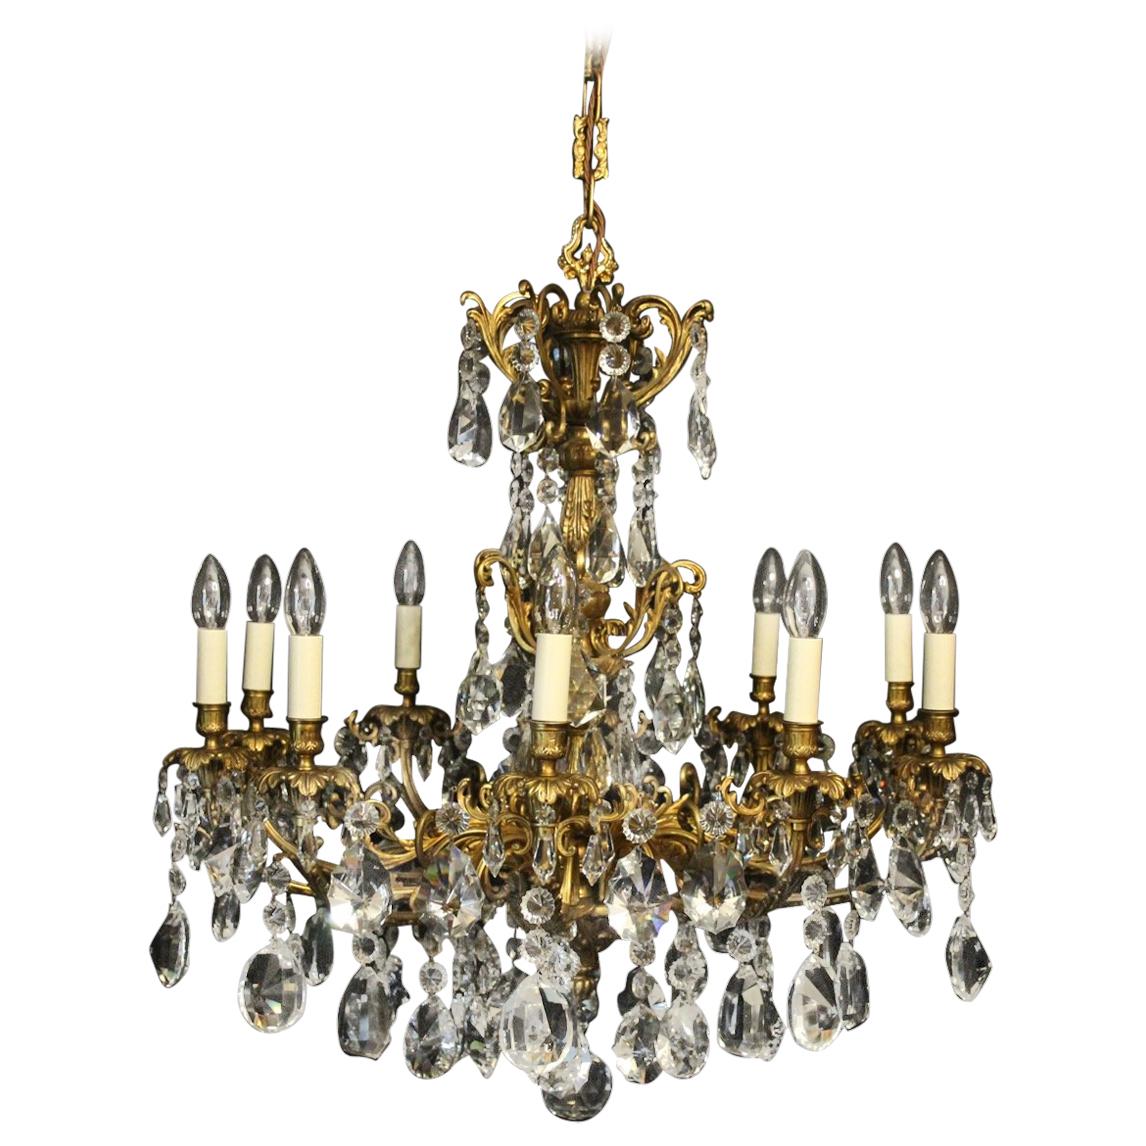 French Gilded Bronze and Crystal 19th Century Antique Chandelier For Sale